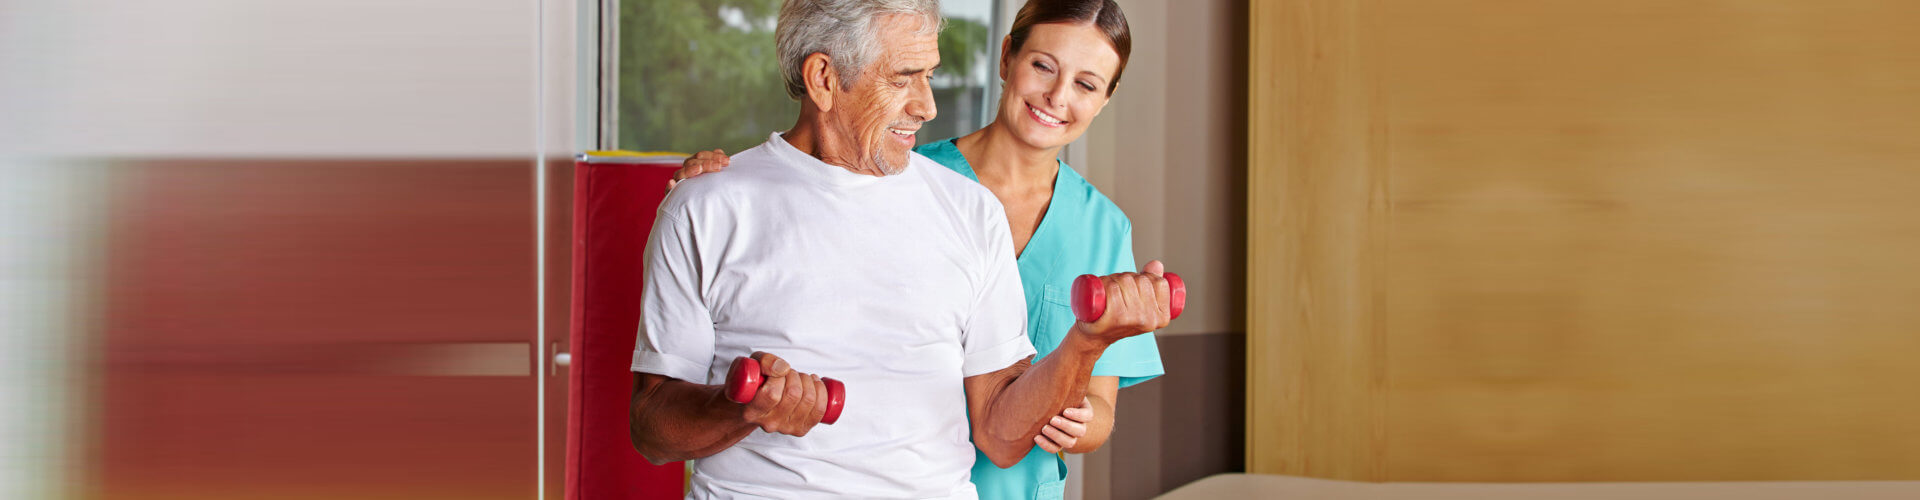 elder man carrying weights with support of a therapist